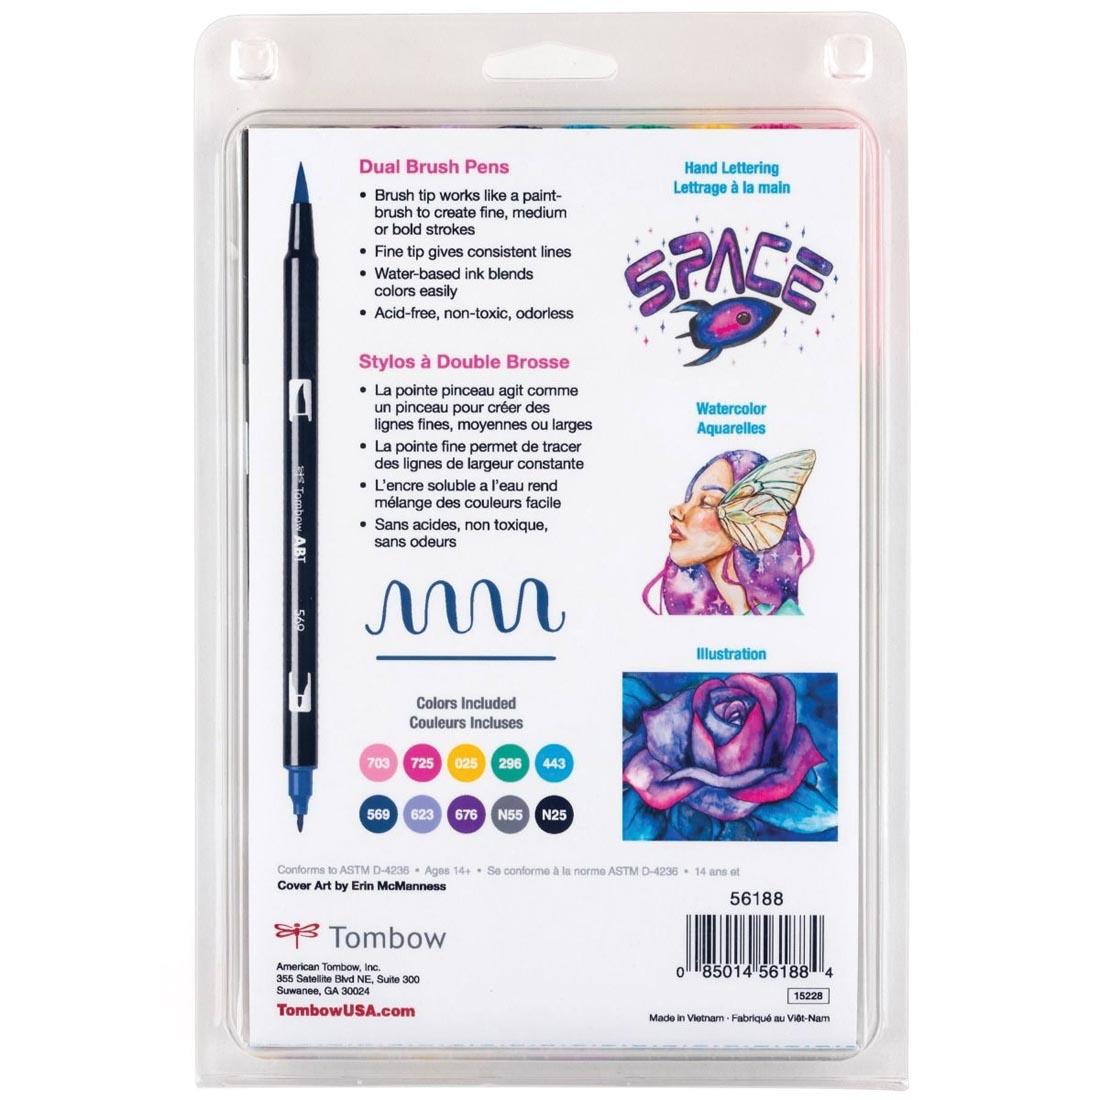 back of package of Tombow Galaxy Dual Brush Pens